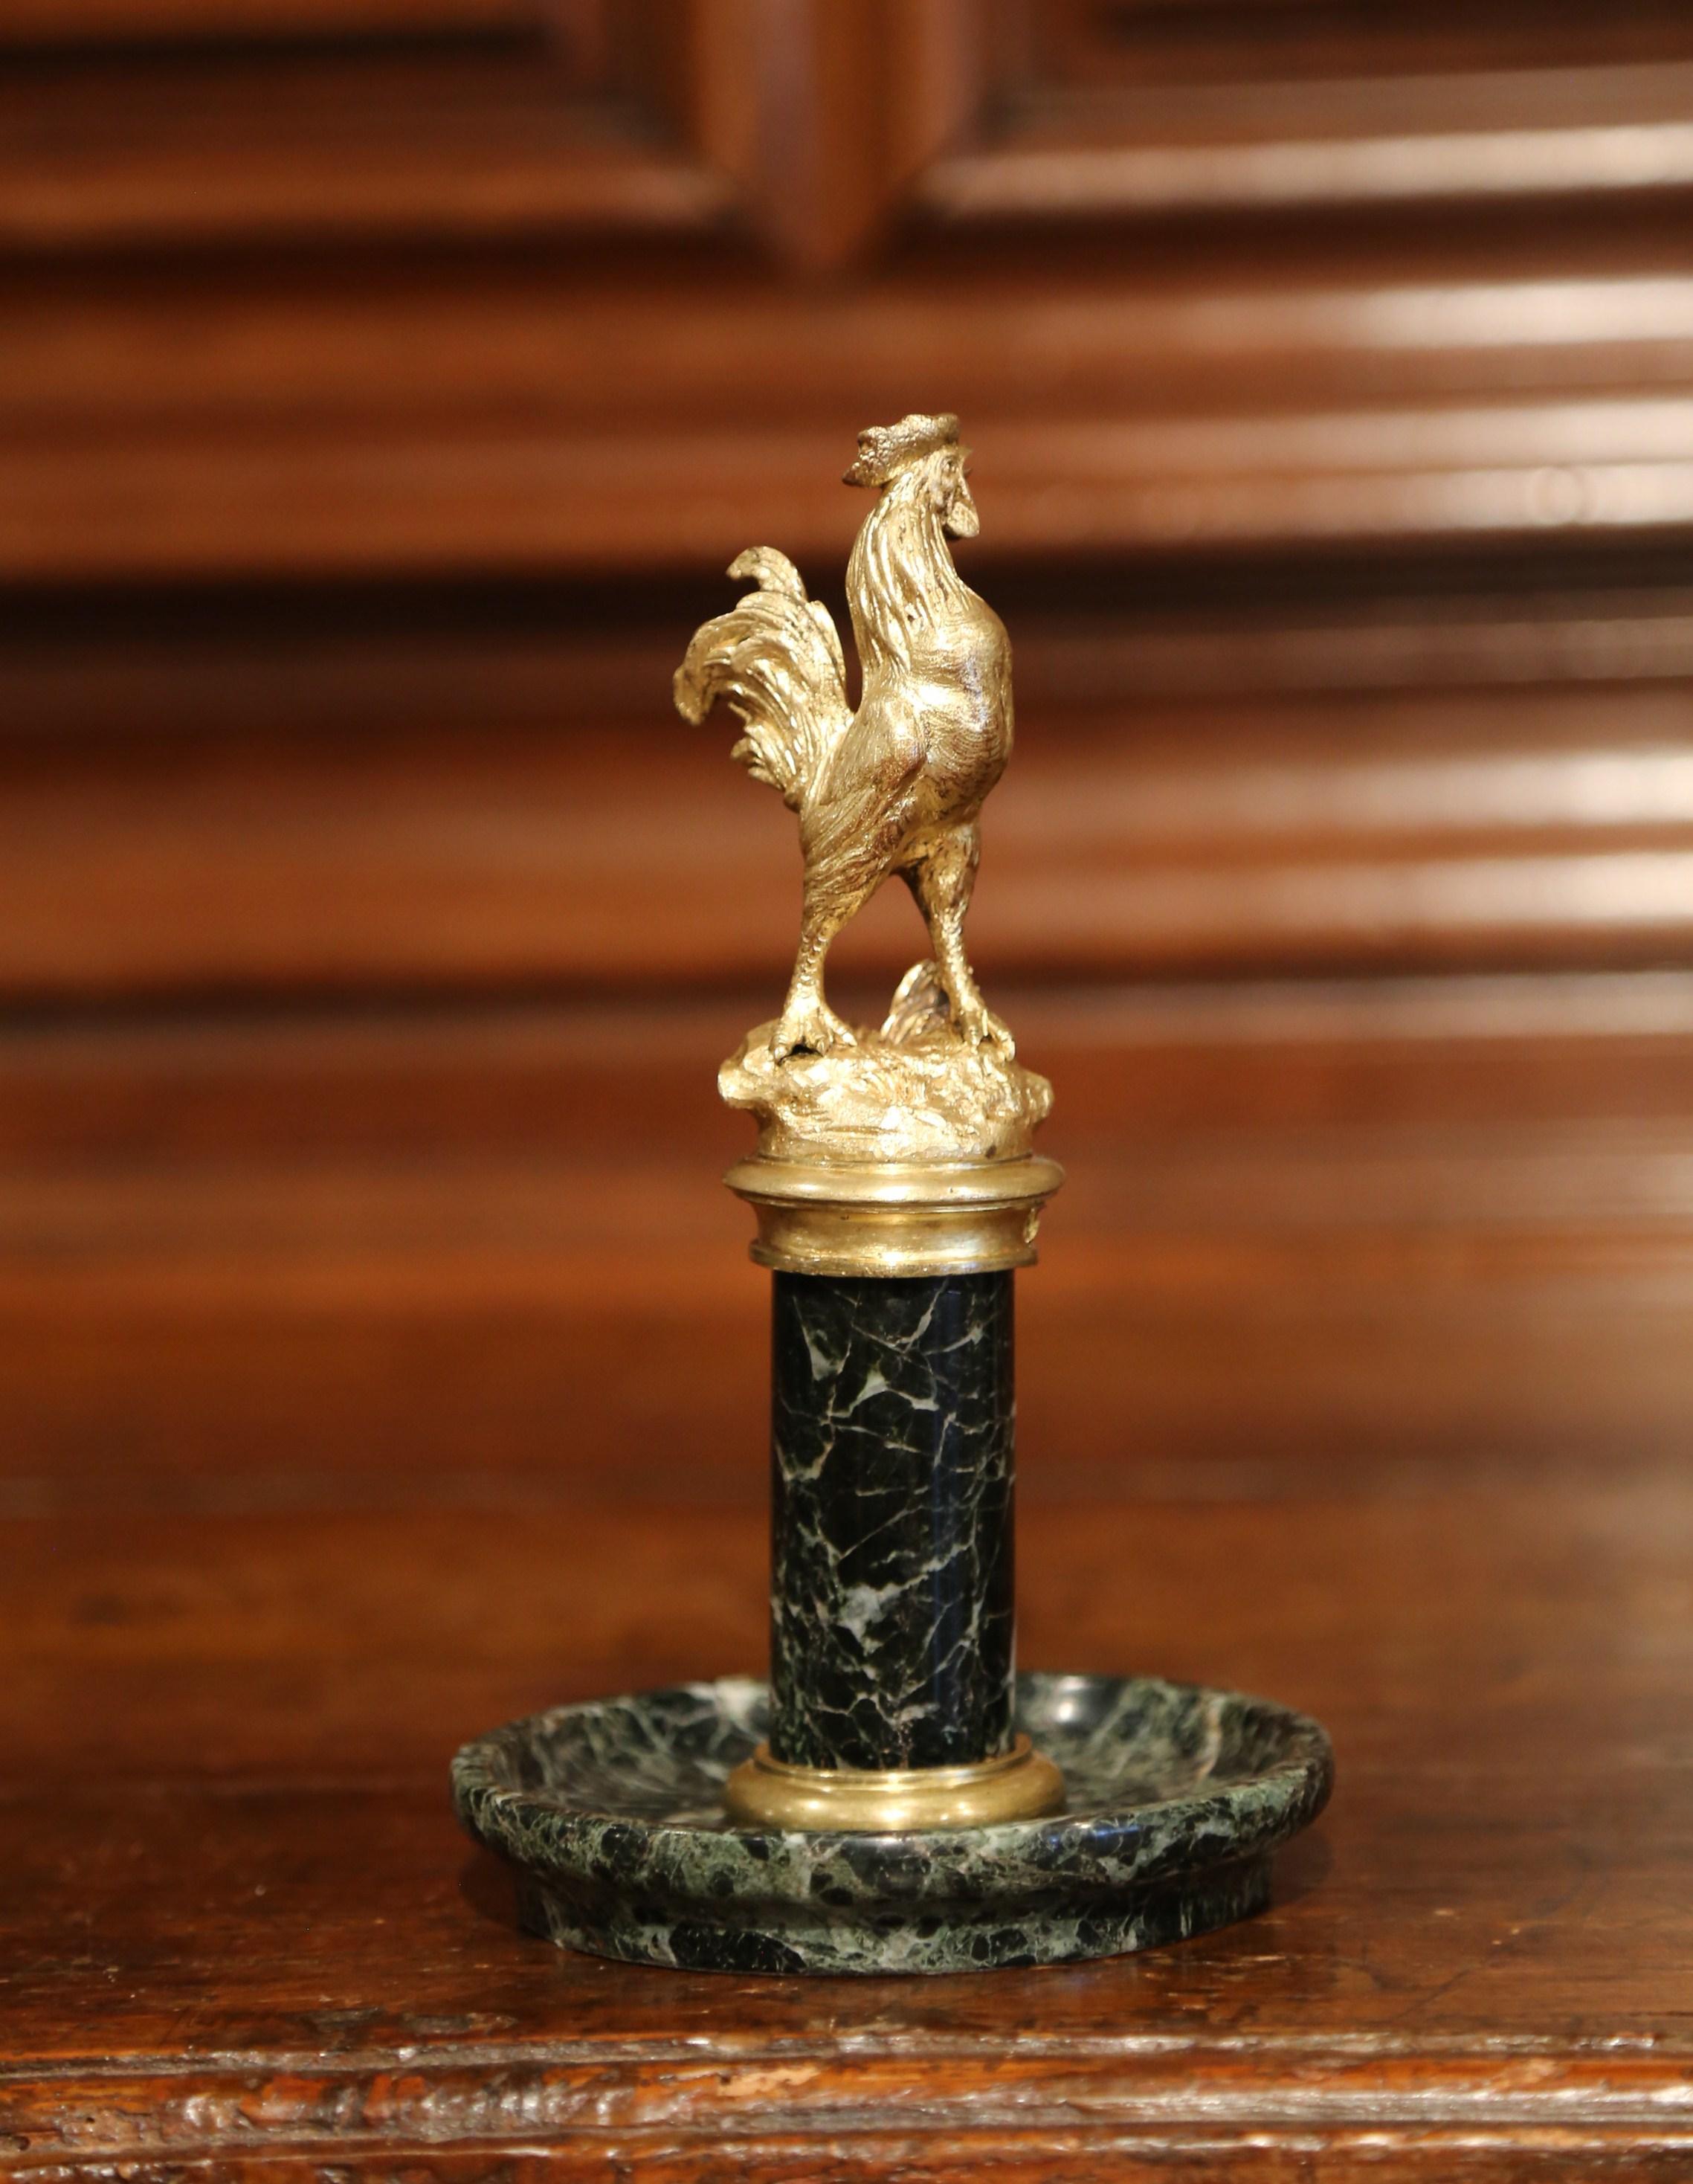 Catch loose change or other odds and ends with this 19th century decorative desktop essential. Crafted in France circa 1890, this ornate vide-poche features a proud bronze rooster standing tall on top of a cylinder pedestal; the circular column is